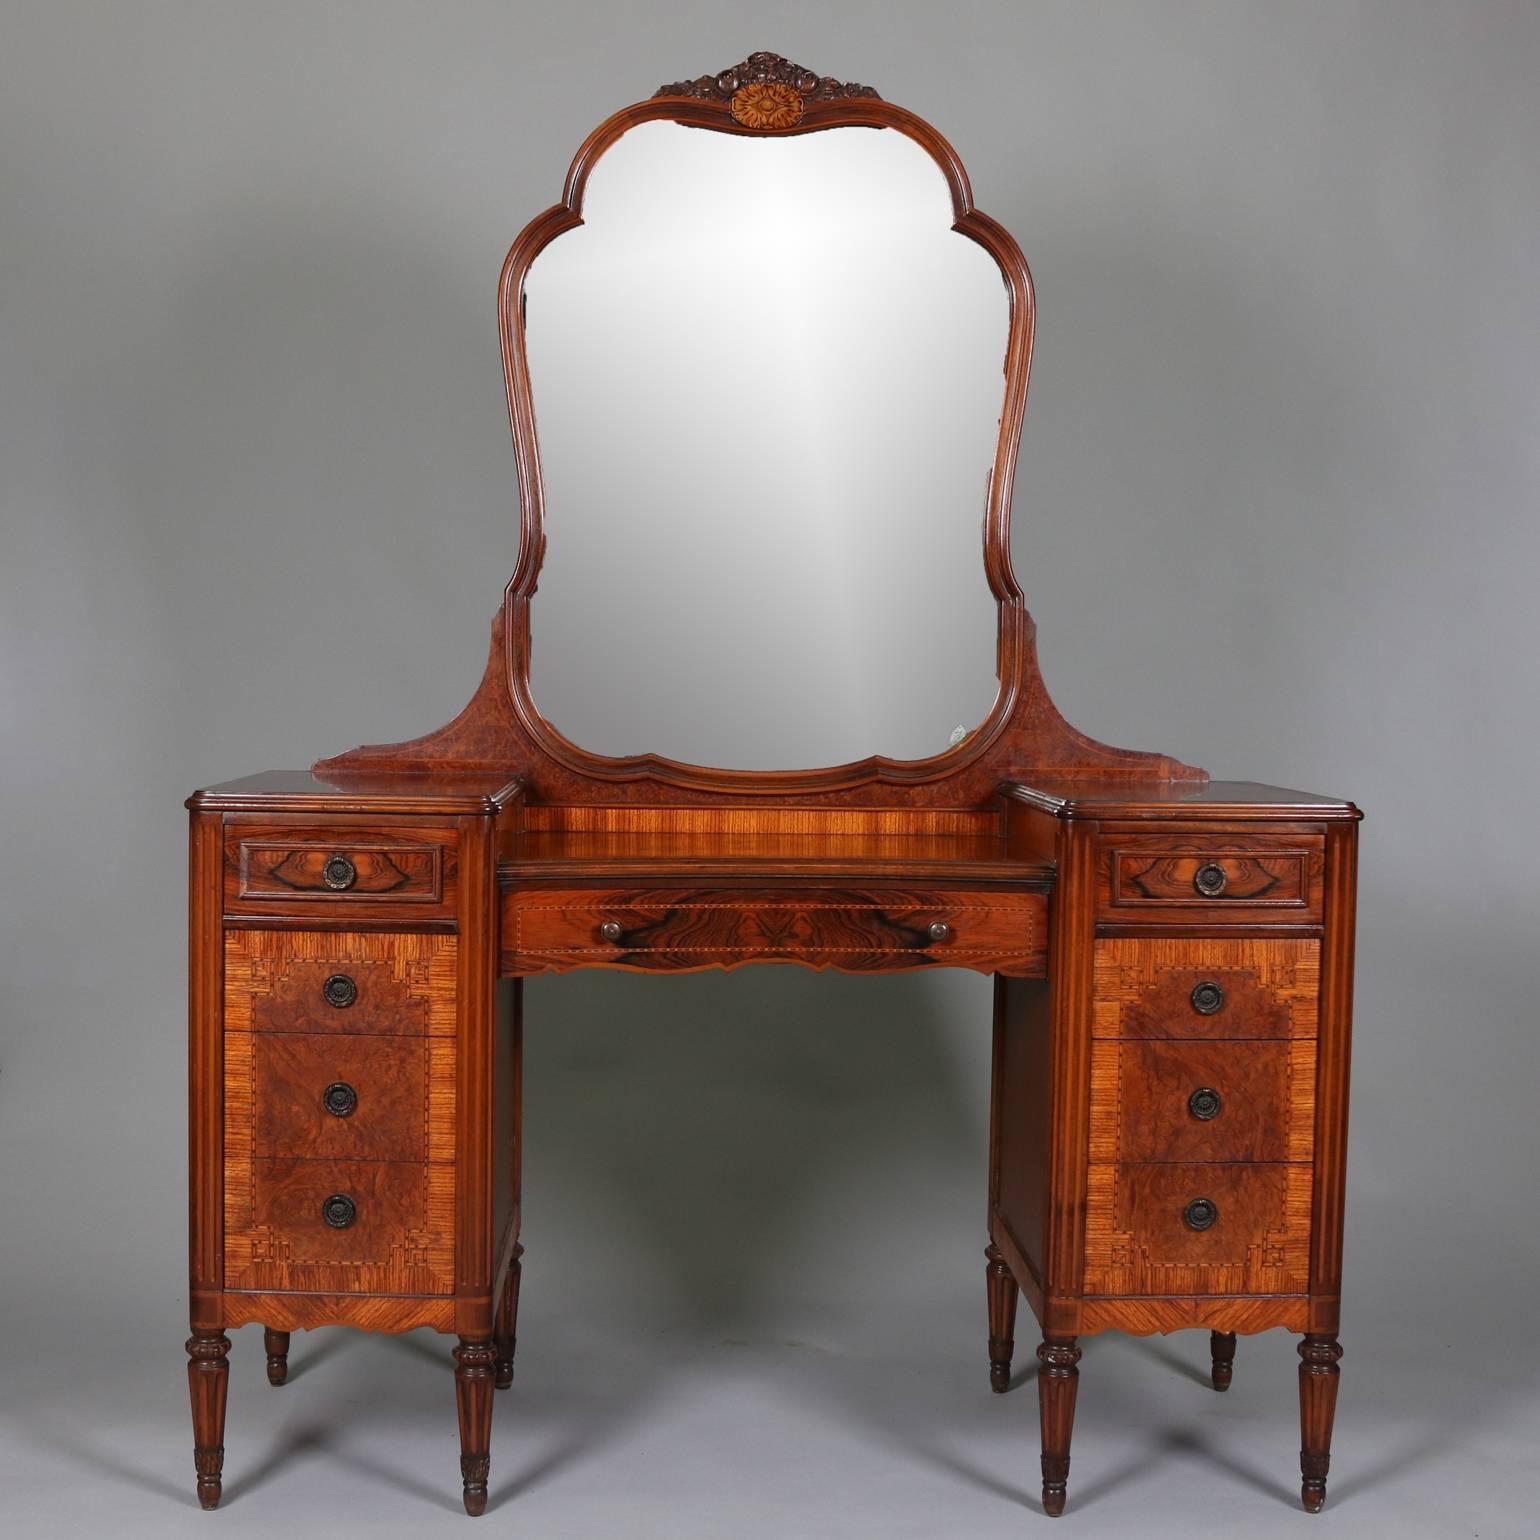 Antique mirrored dressing table features bookmatched flame mahogany and burl panels with deeply striated and inlaid parquetry bordering, carved foliate and floral accents, circa 1920

Matching high chest and low chest listed separately.